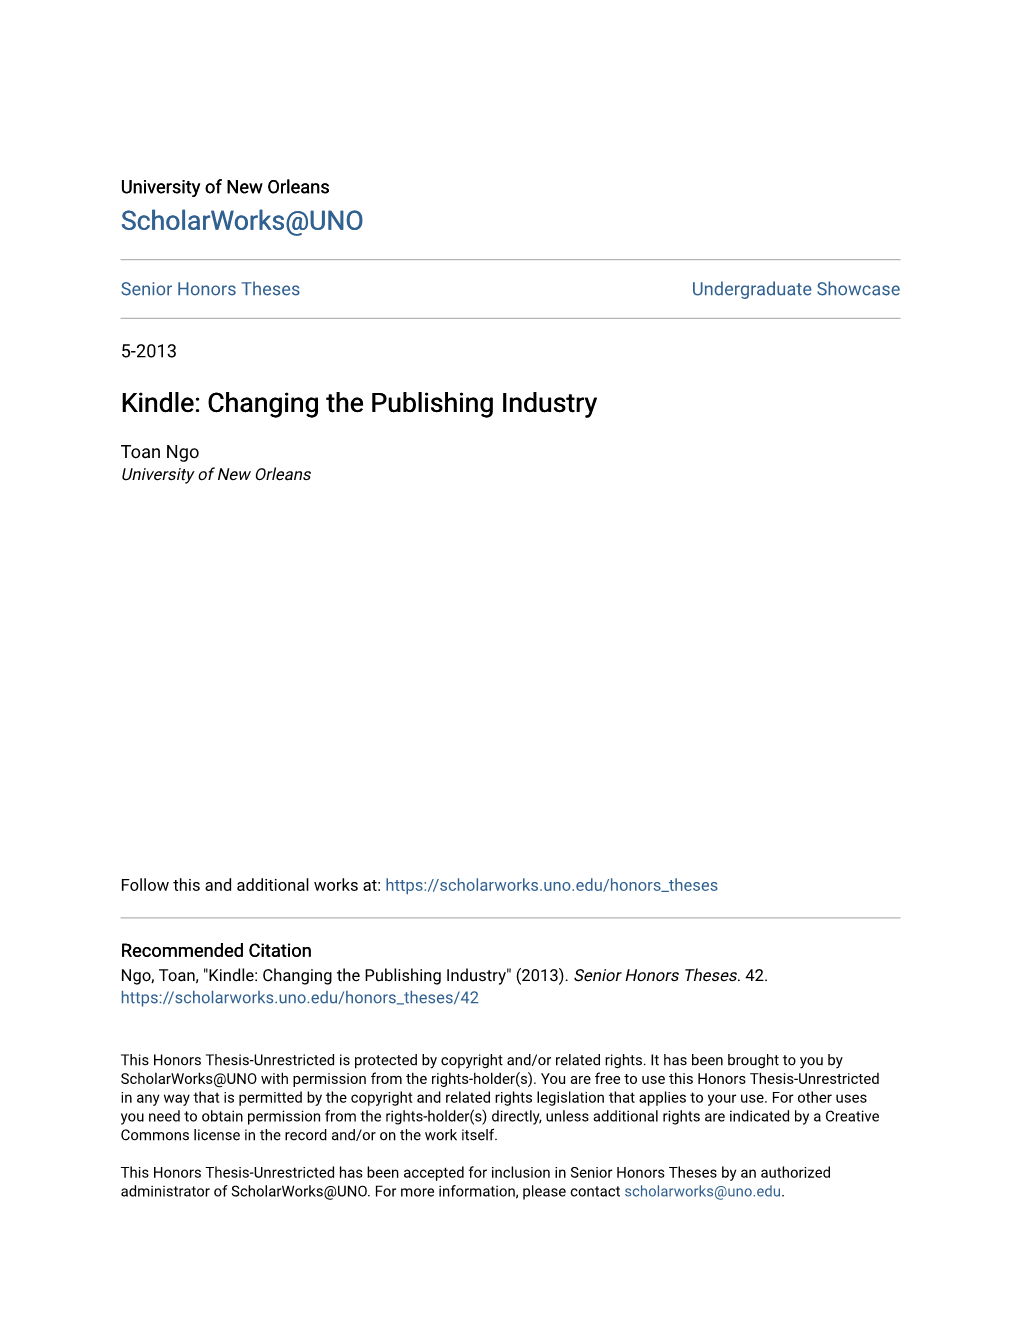 Kindle: Changing the Publishing Industry